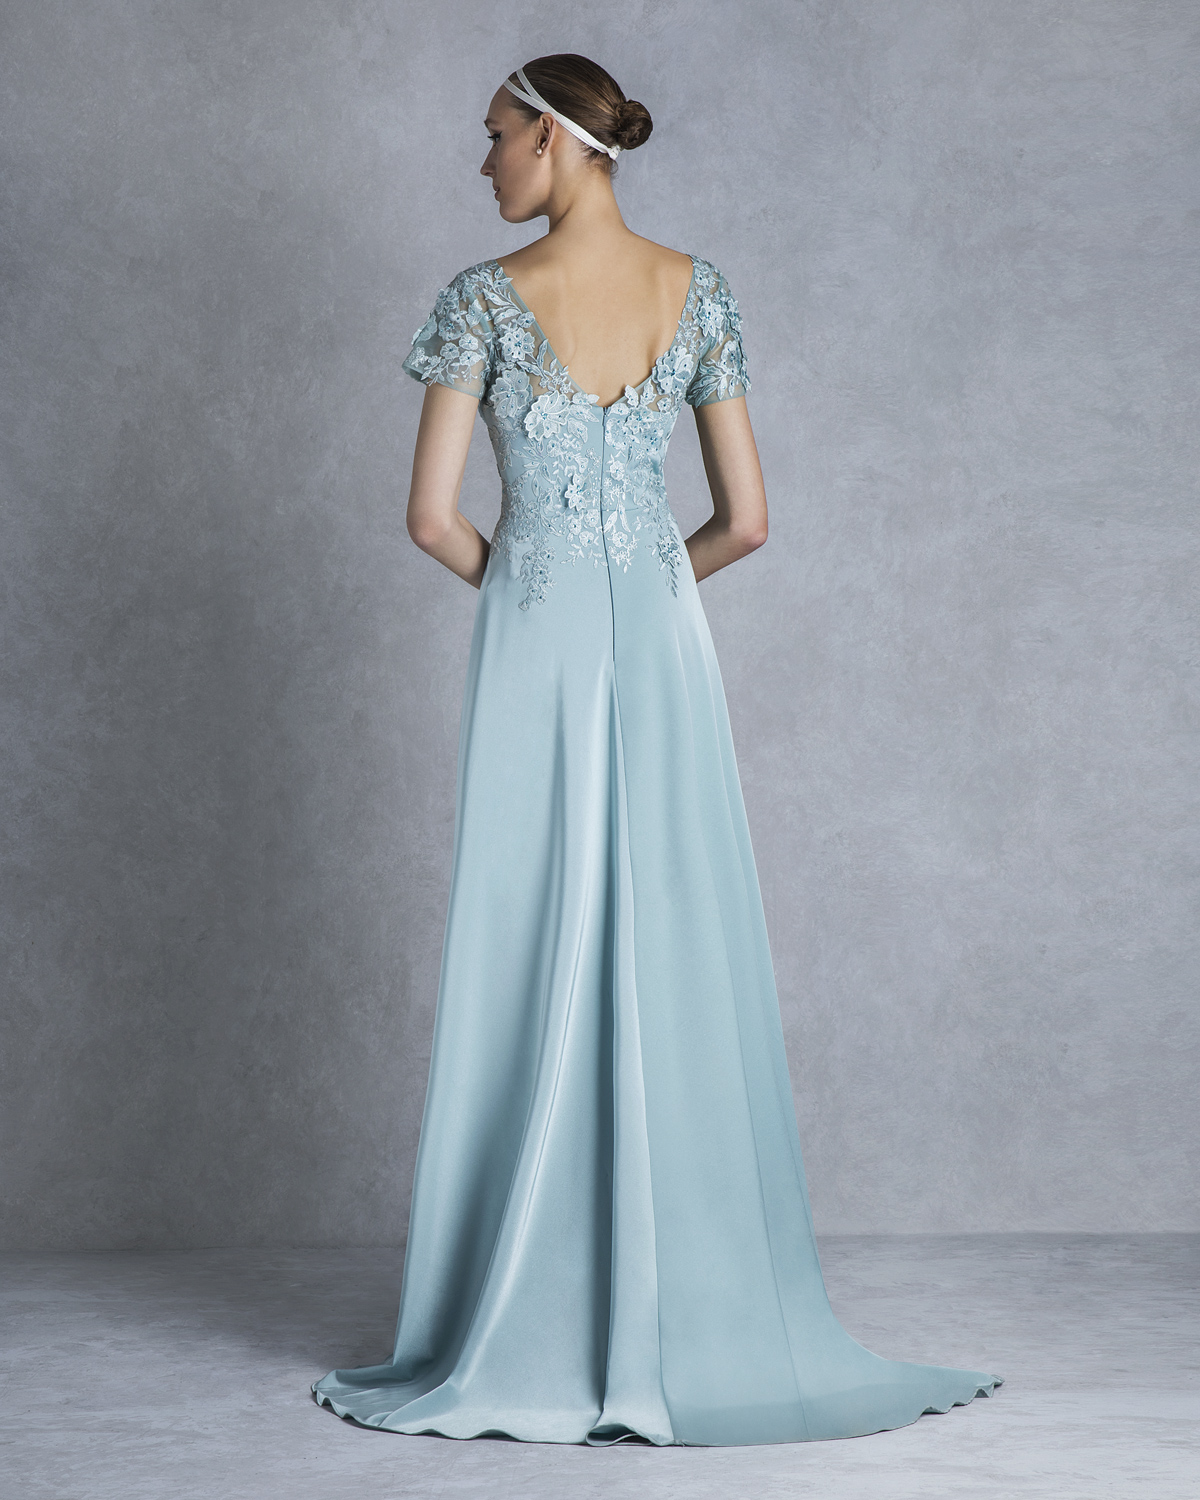 Классические платья / Long evening dress with lace for the mother of the bride